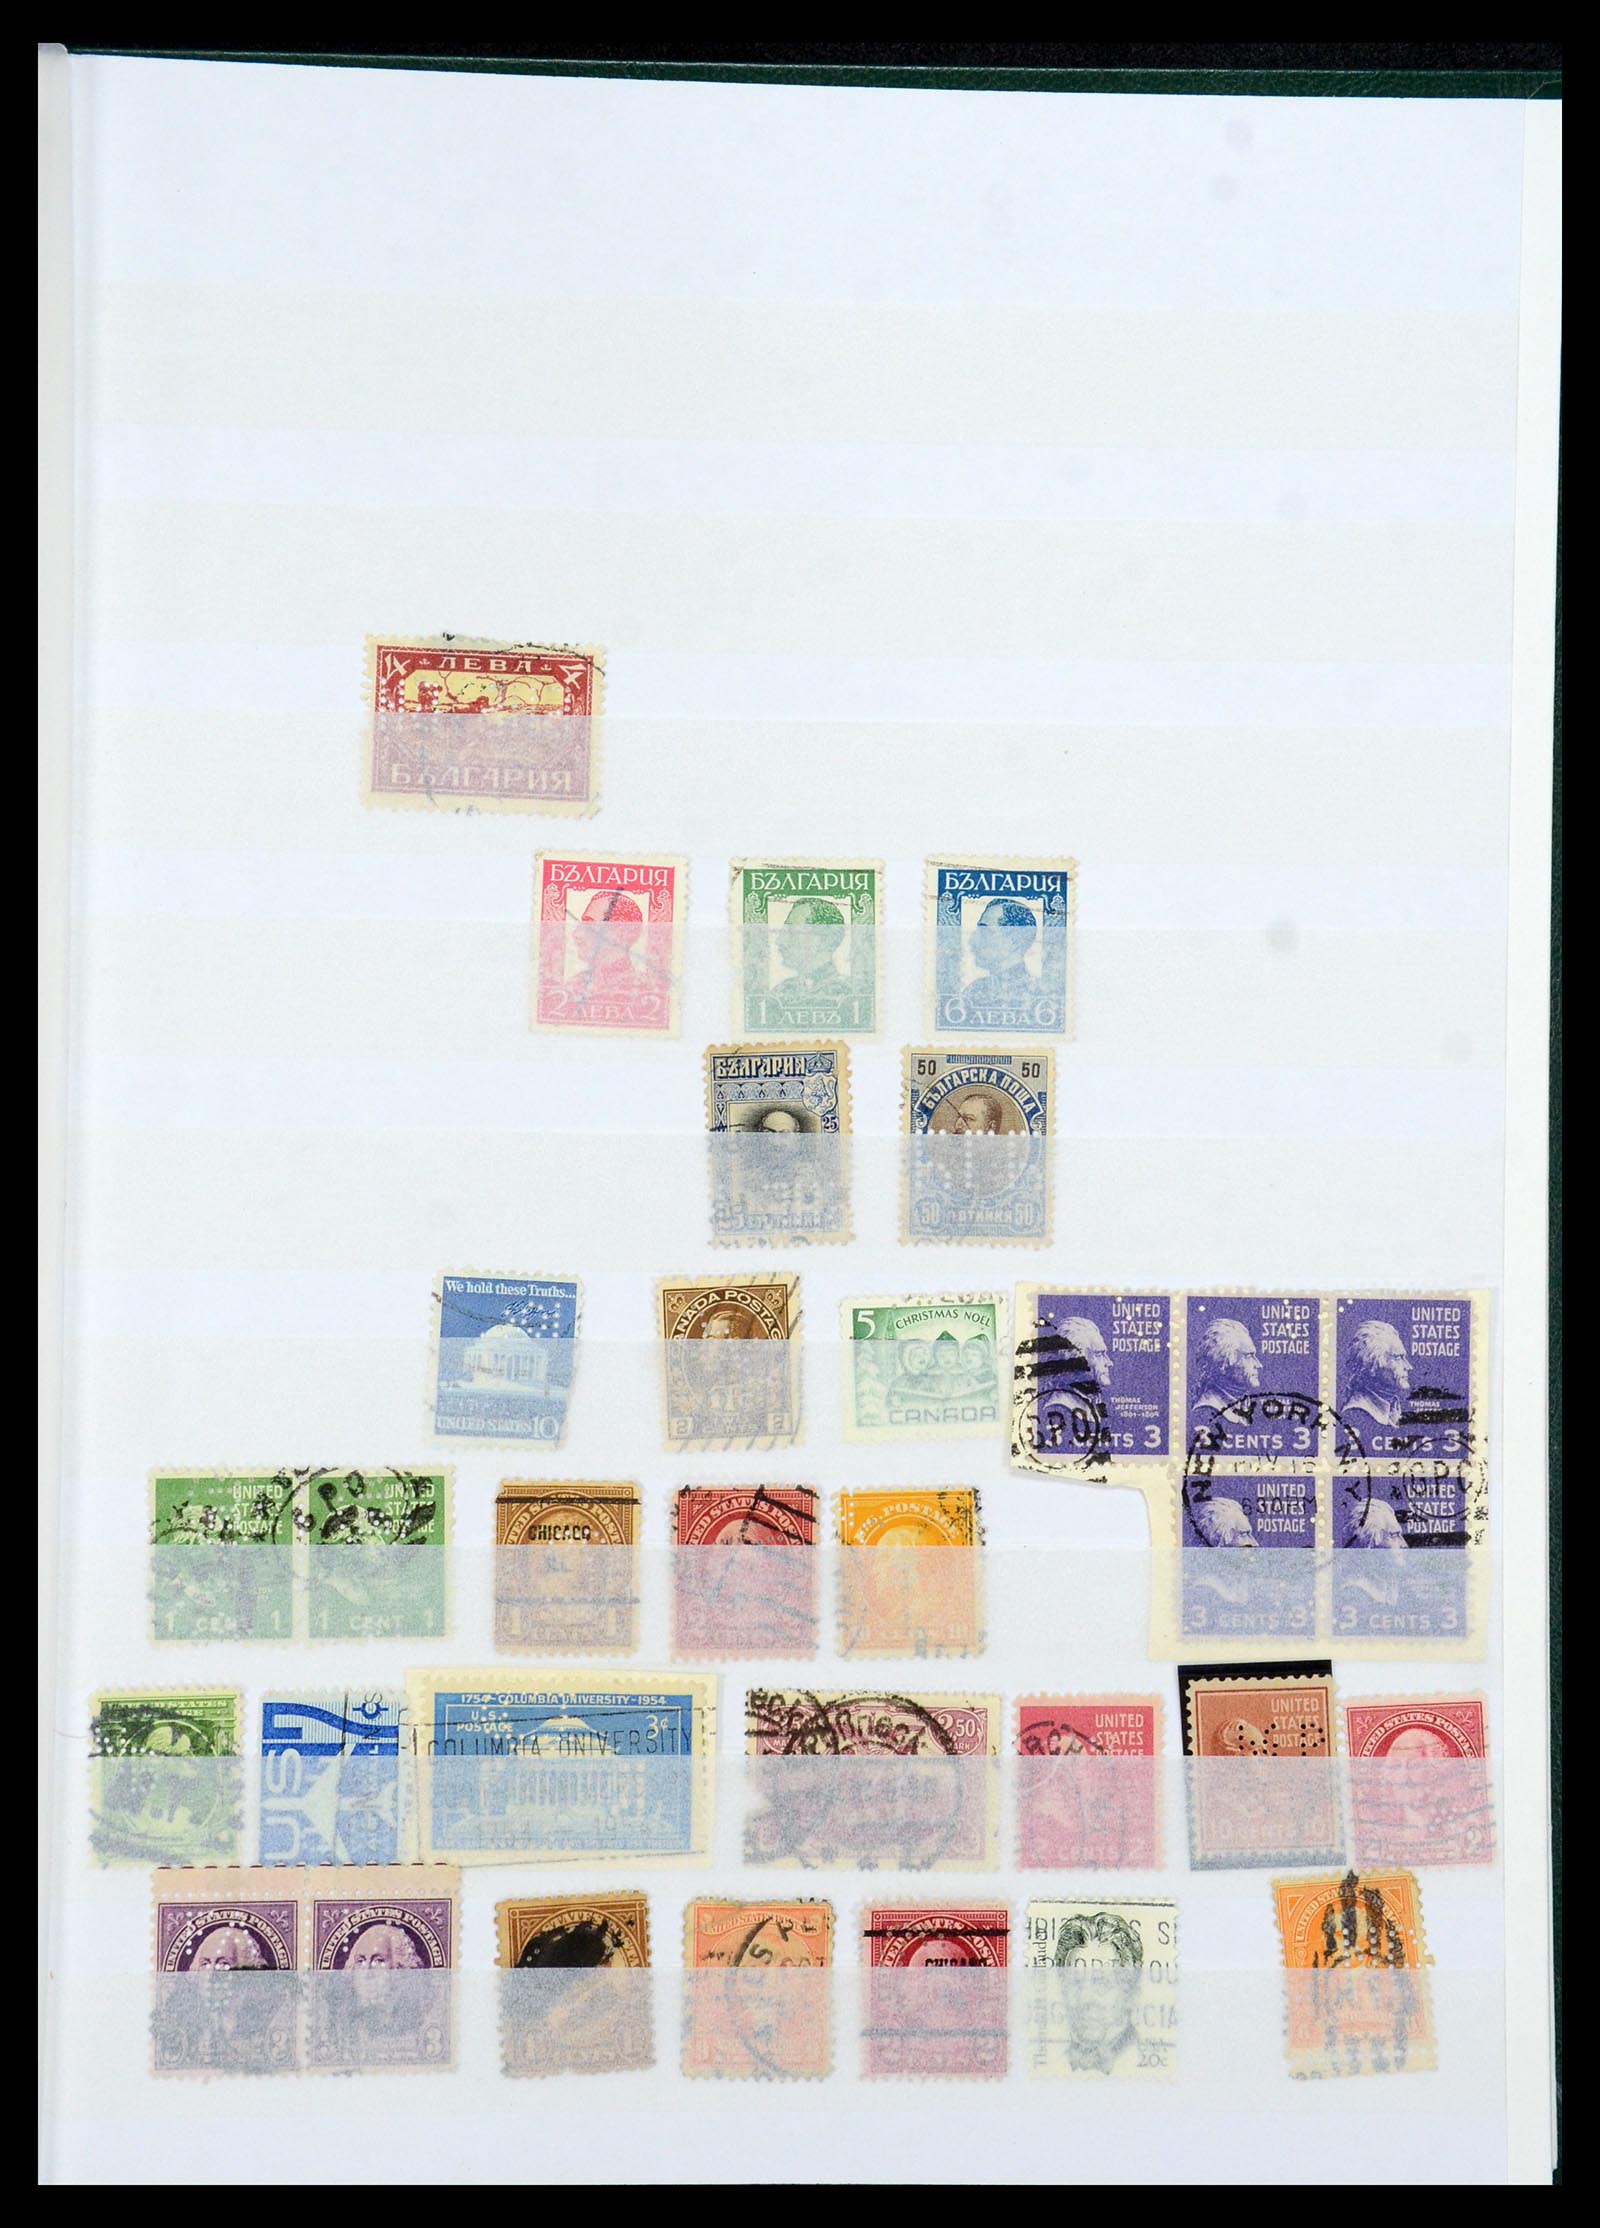 36111 073 - Stamp collection 36111 France perfins 1880-1950.